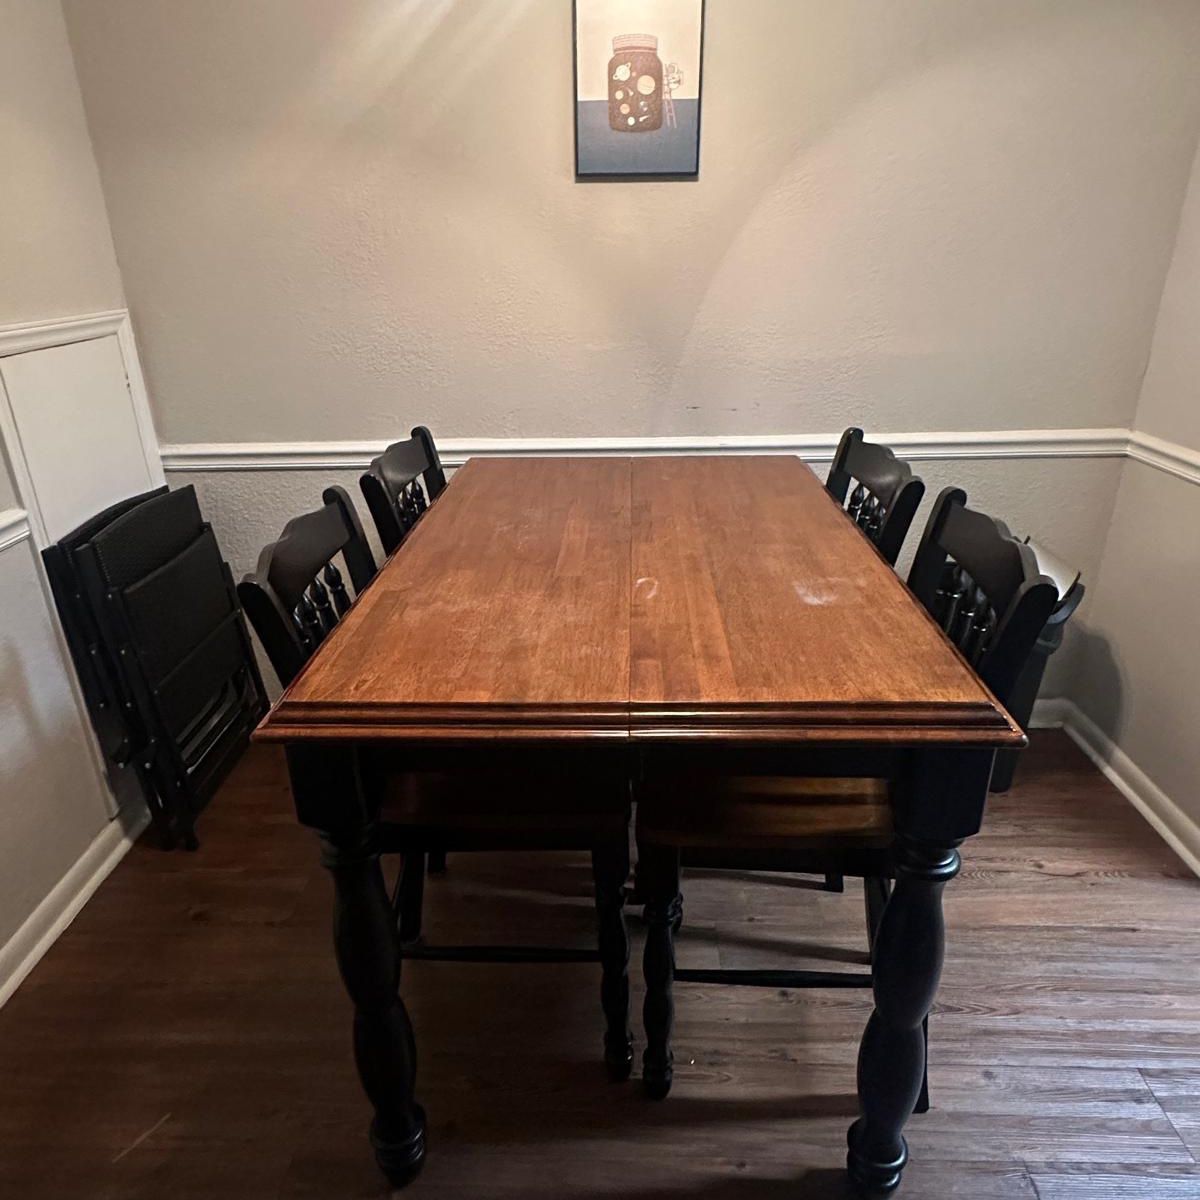 Dining Table With 4 Chairs, Counter Height